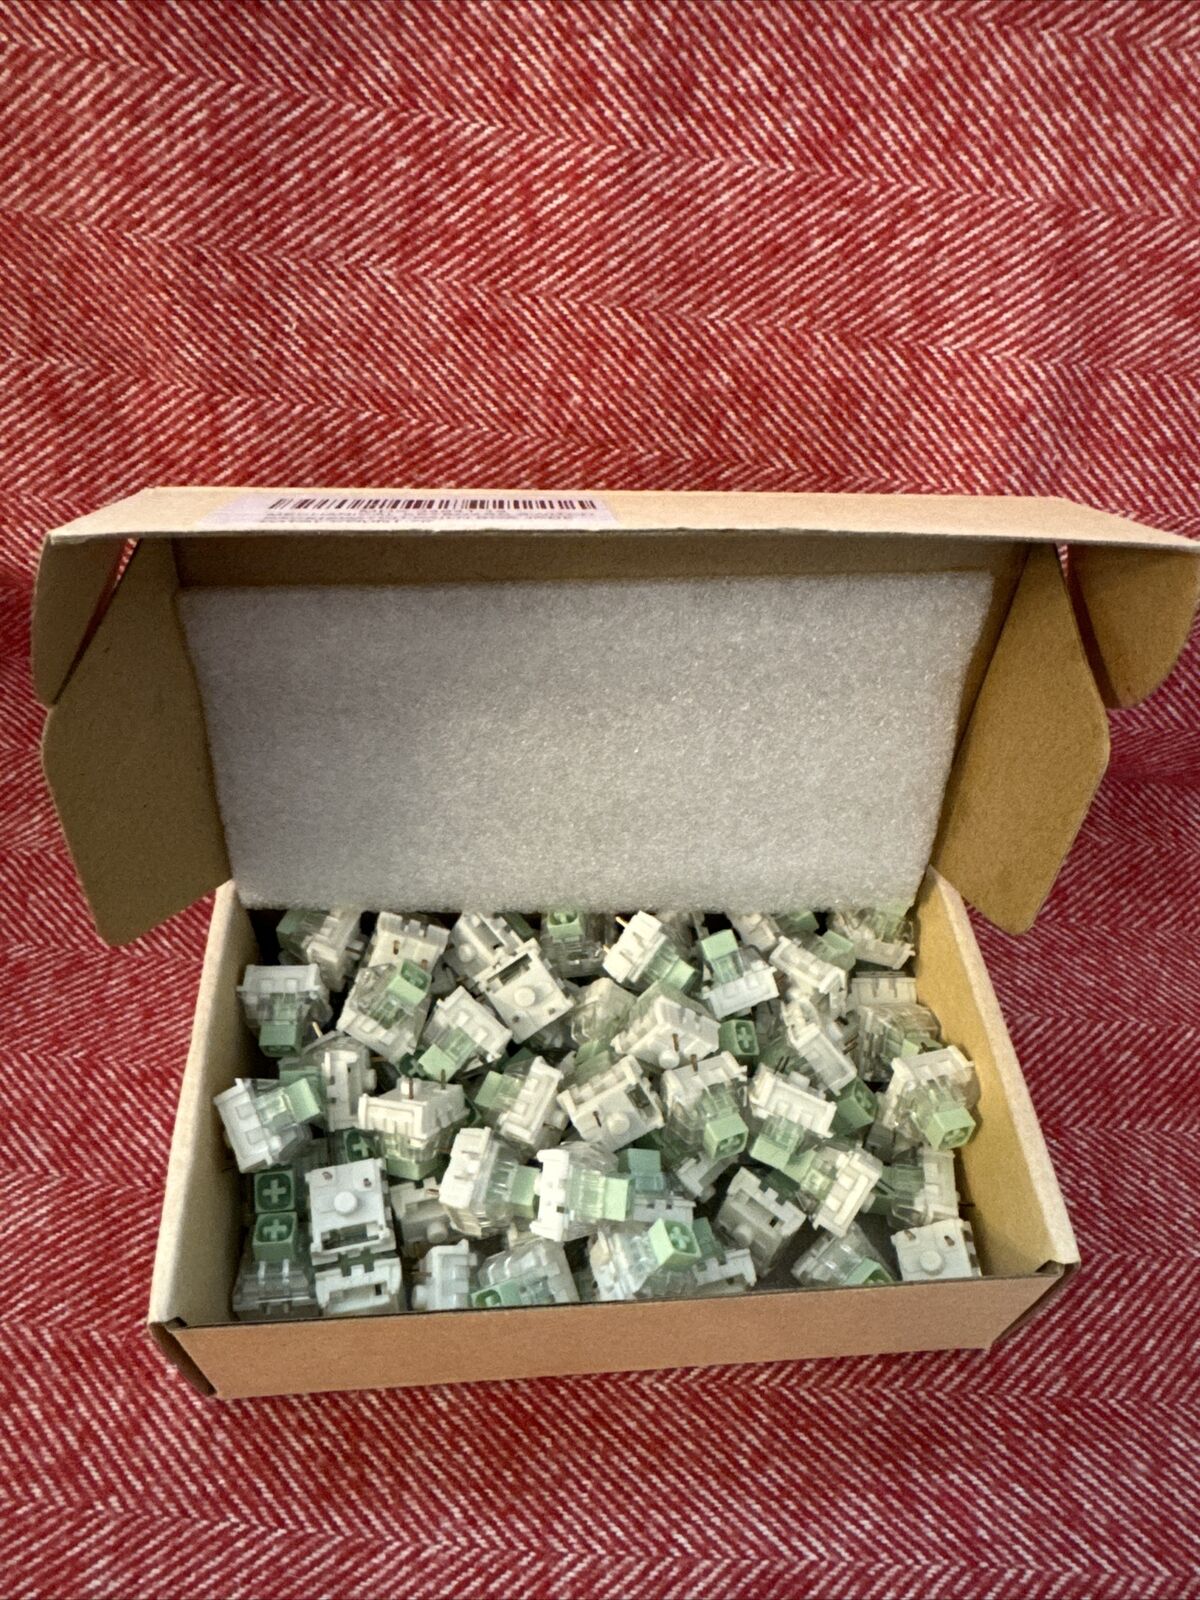 KAILH X NOVELKEYS BOX JADE MX MECHANICAL SWITCHES - 70 COUNT 